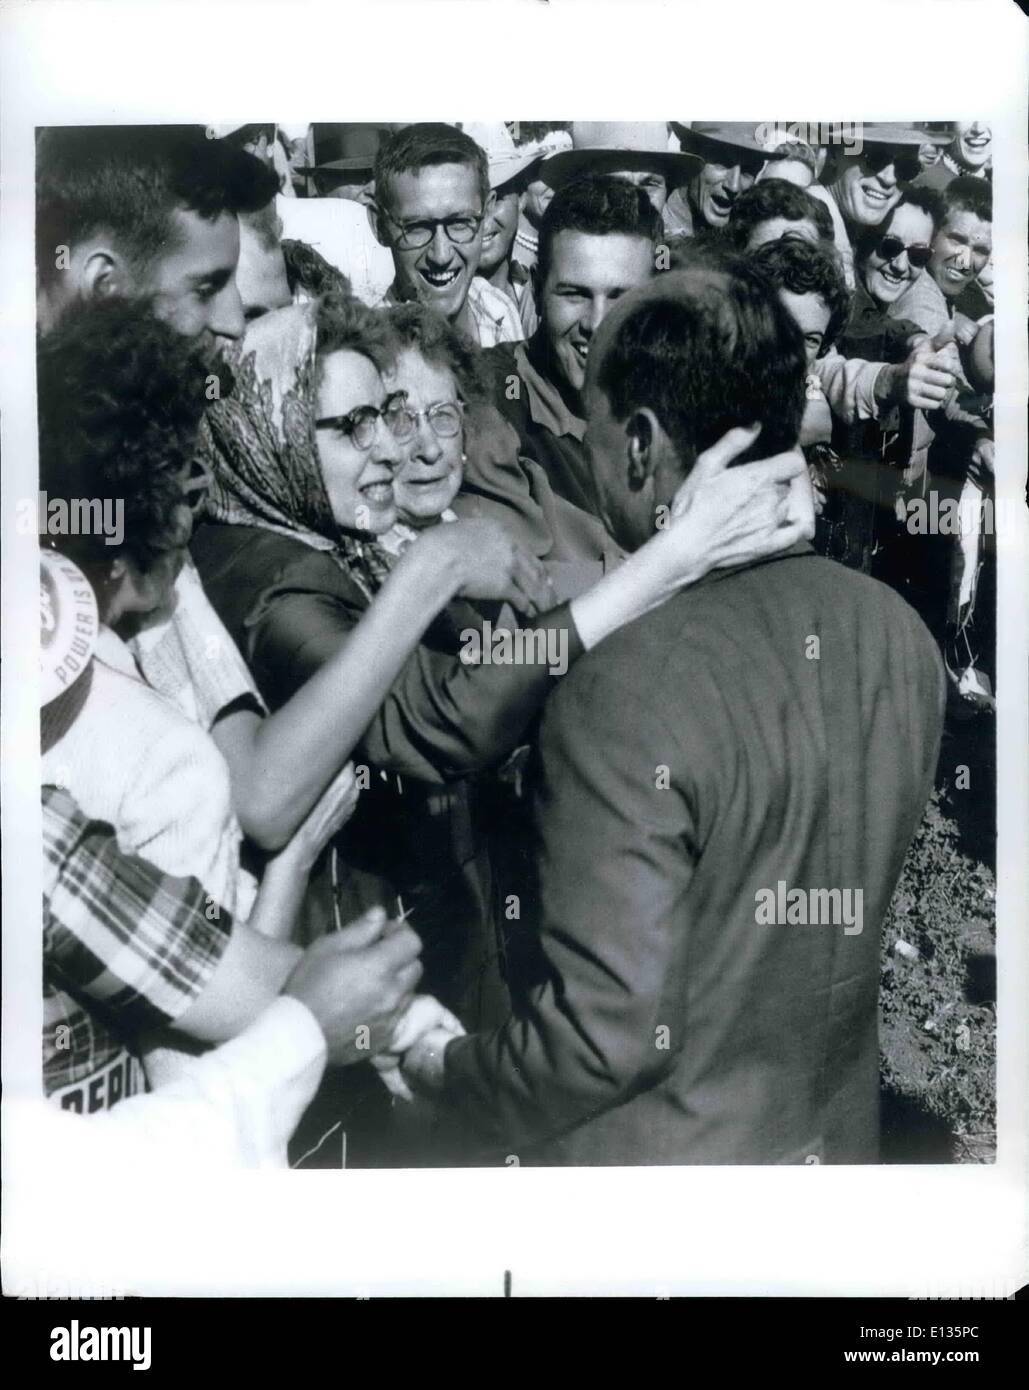 Feb. 28, 2012 - That the people may decide: Adlai E. Stevenson's discourses produced a diverse but fiercely loyal host of supporters in his losing 1952 and 1956 candidacies. His eloquence often roused intense emotions, as demonstrated by this woman's unexpected embrace. Stock Photo